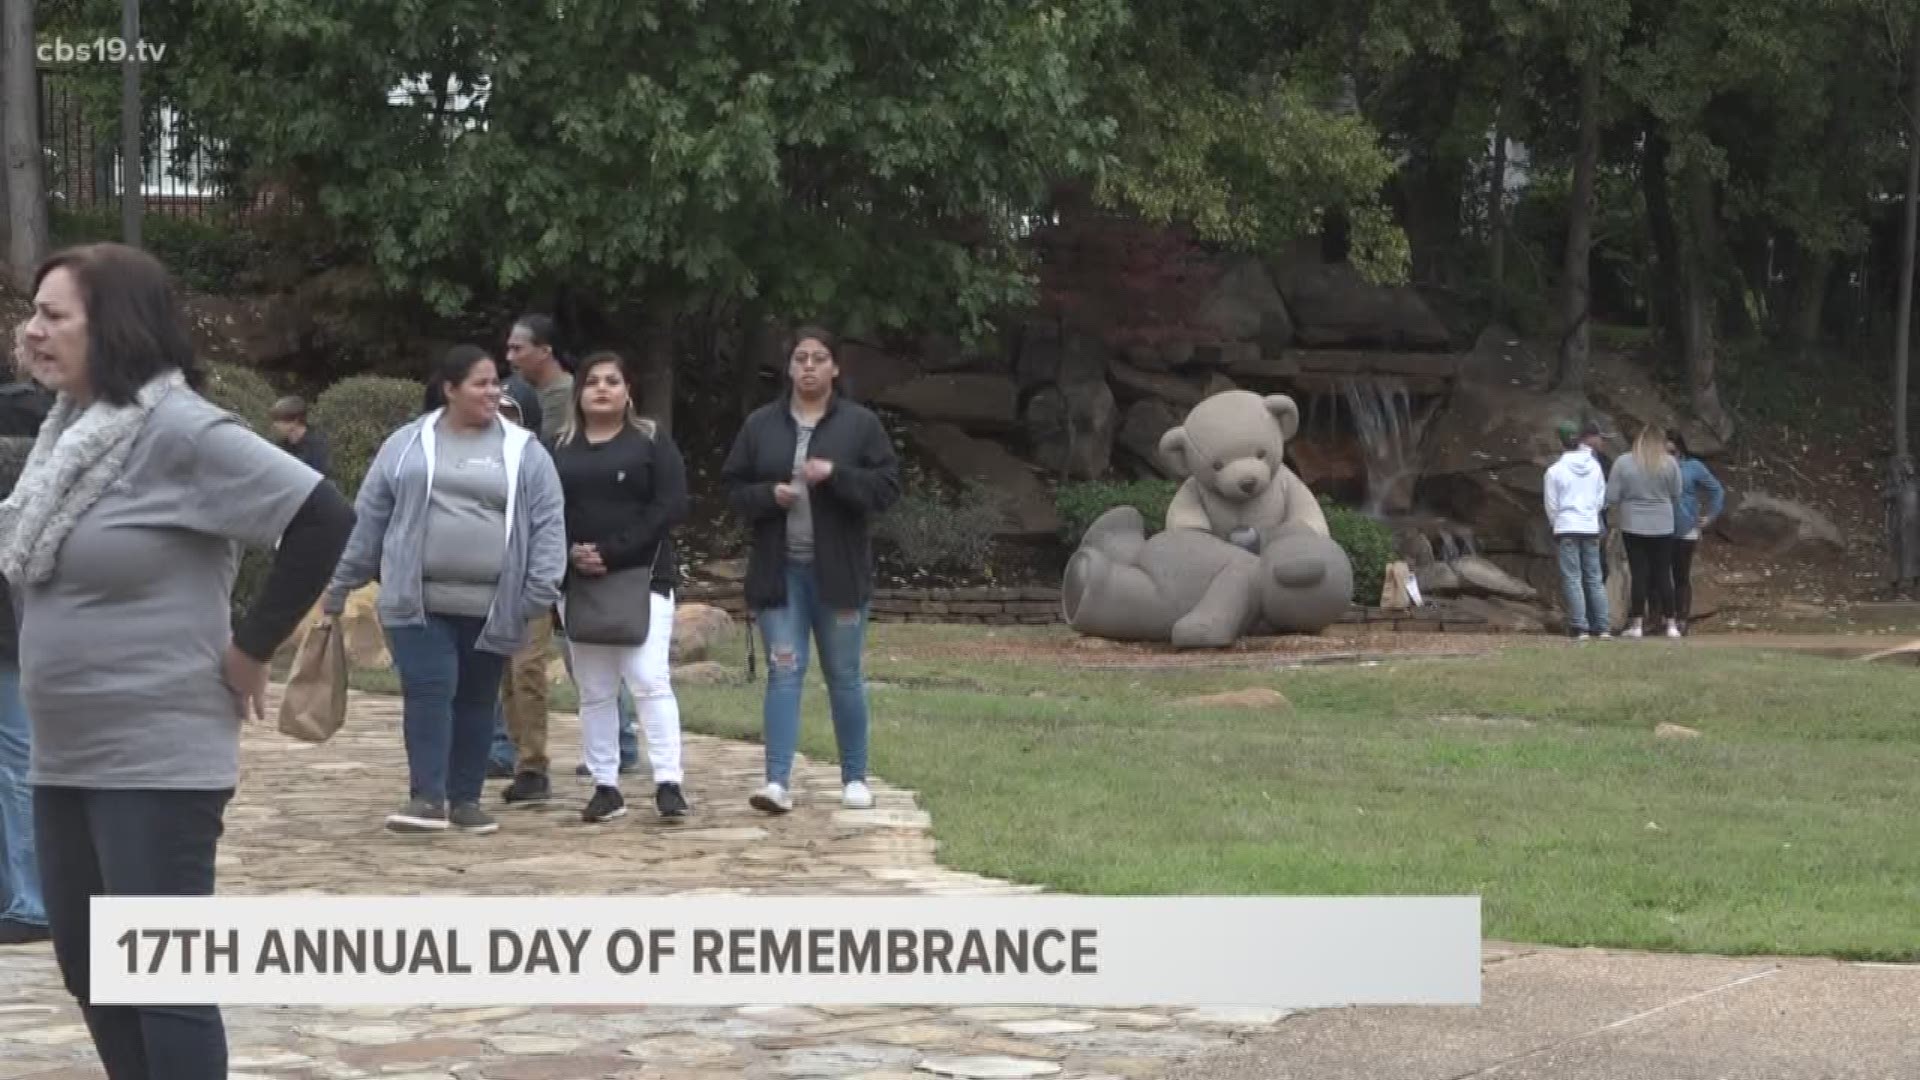 October 26 marked the 17th Annual Day of Remembrance at the Children's Park of Tyler.